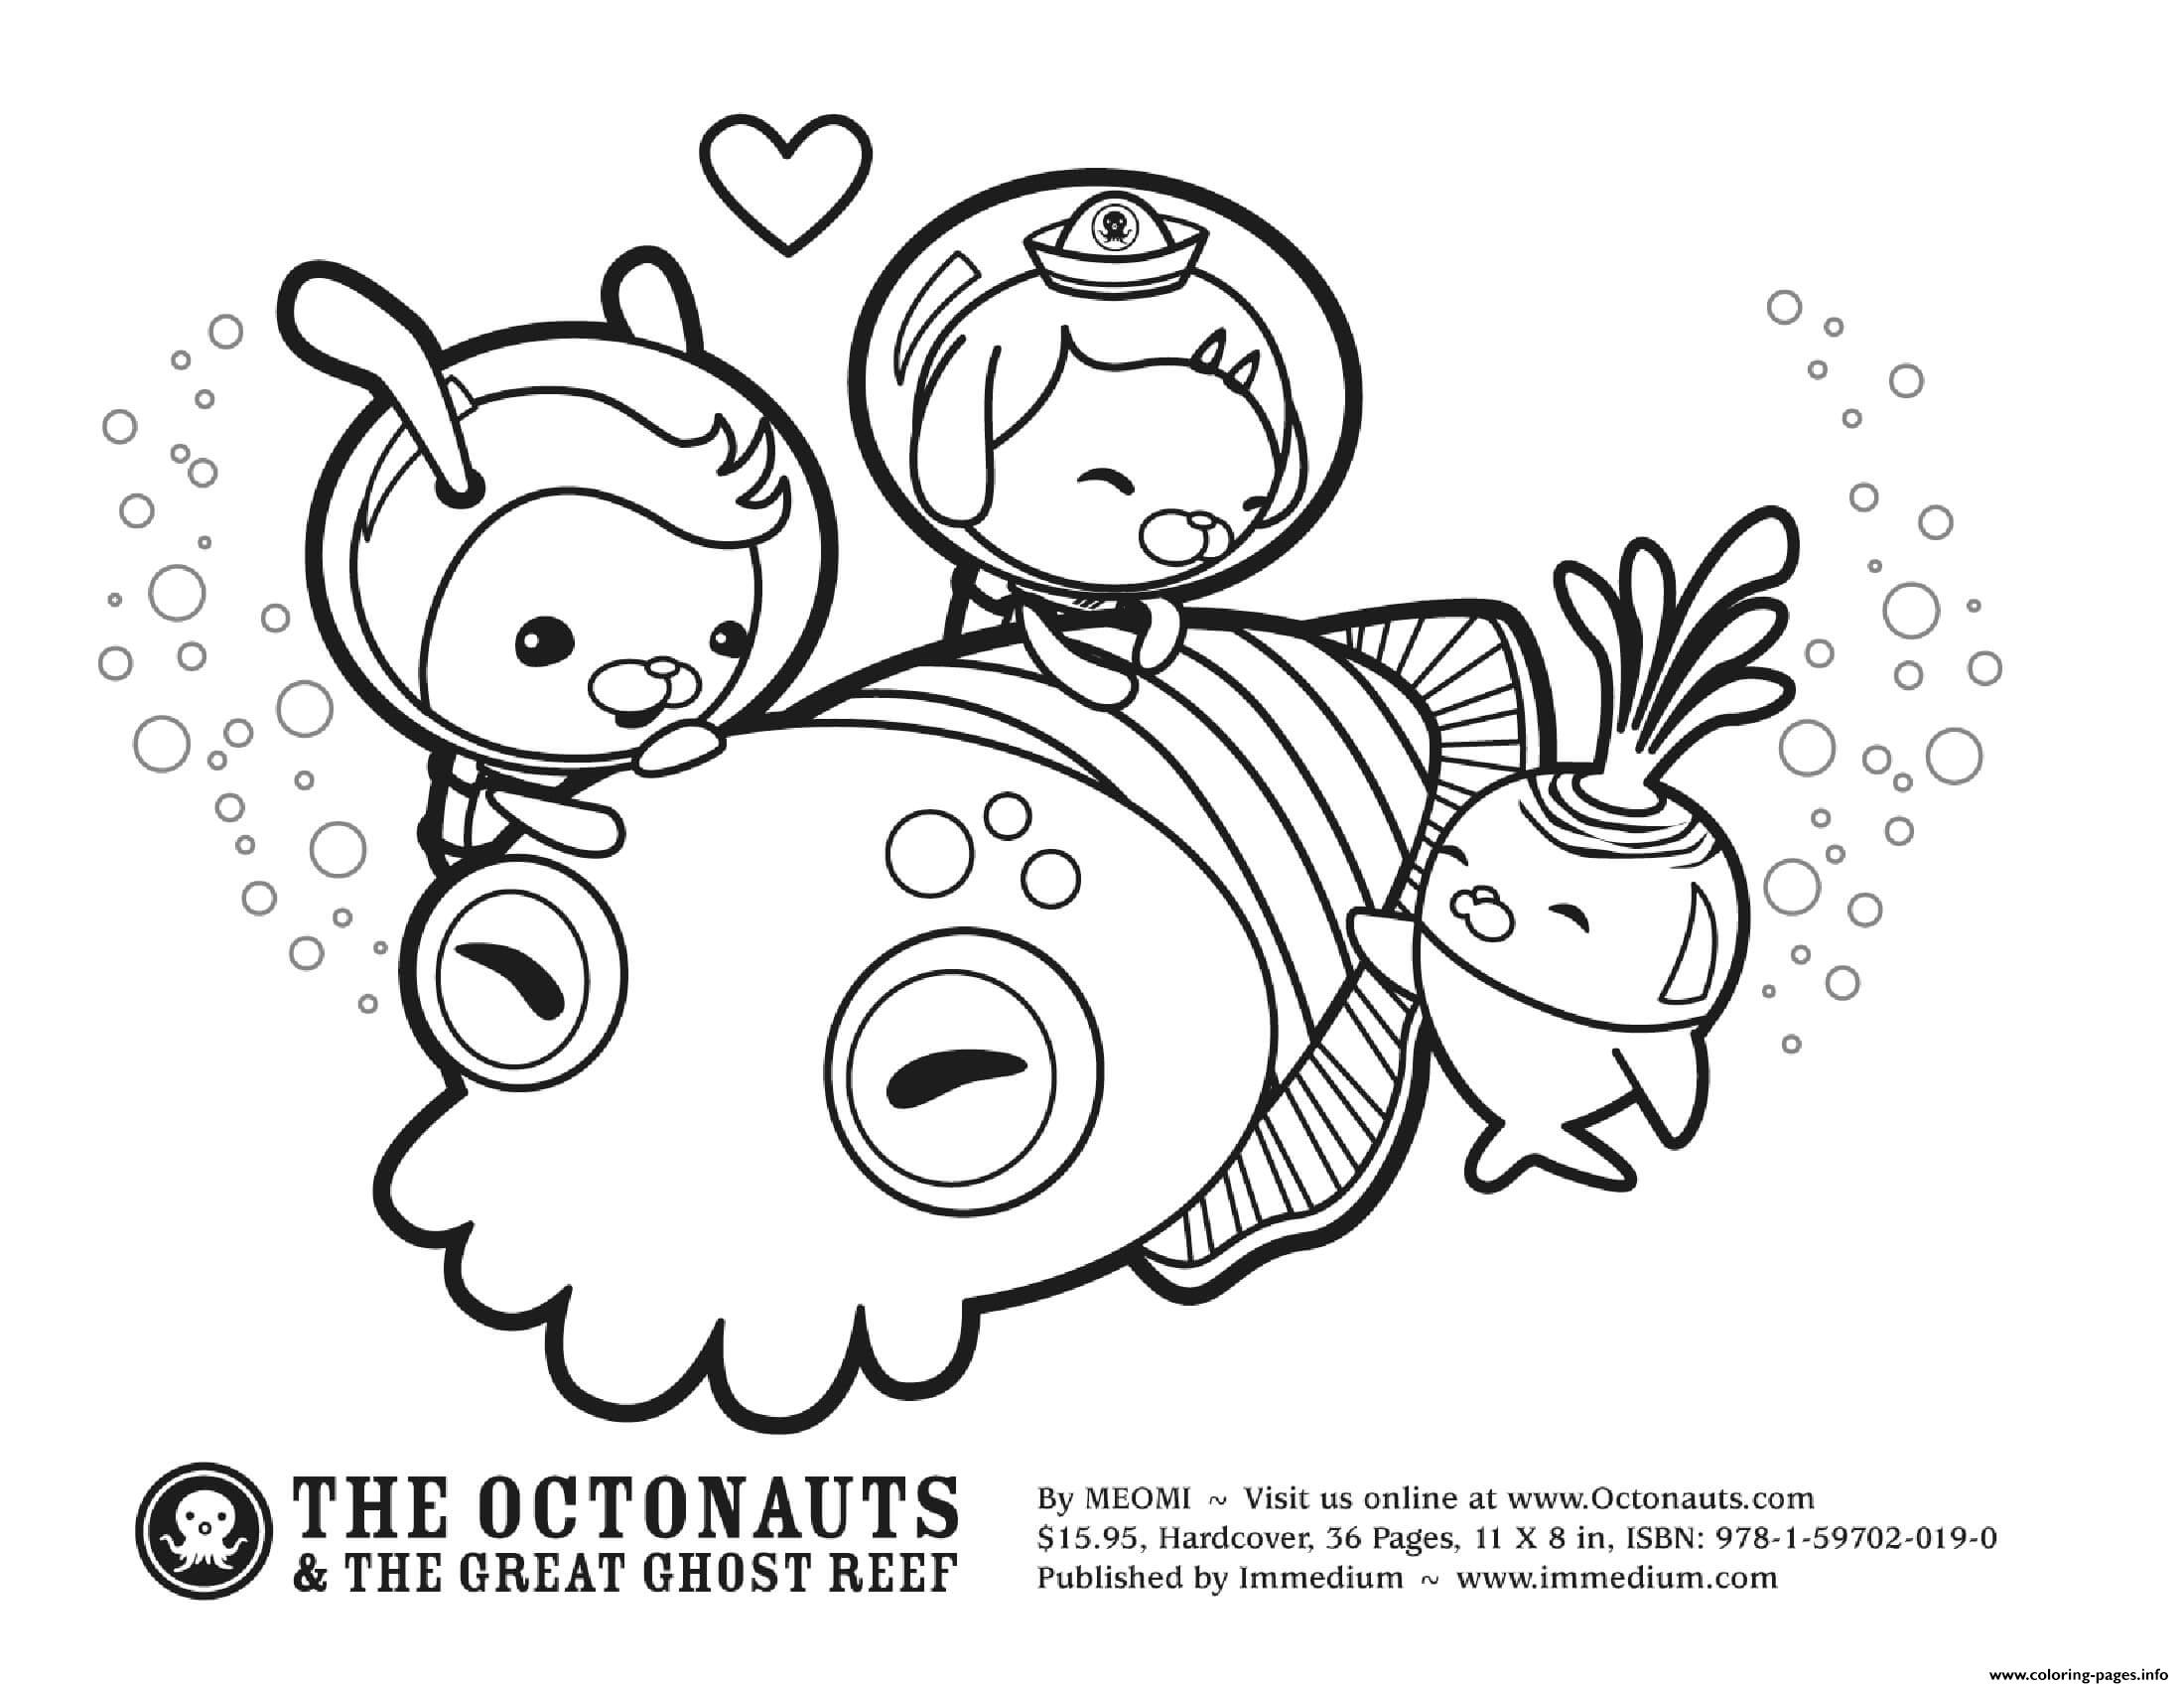 Cuddle With A Cuttlefish Octonauts coloring